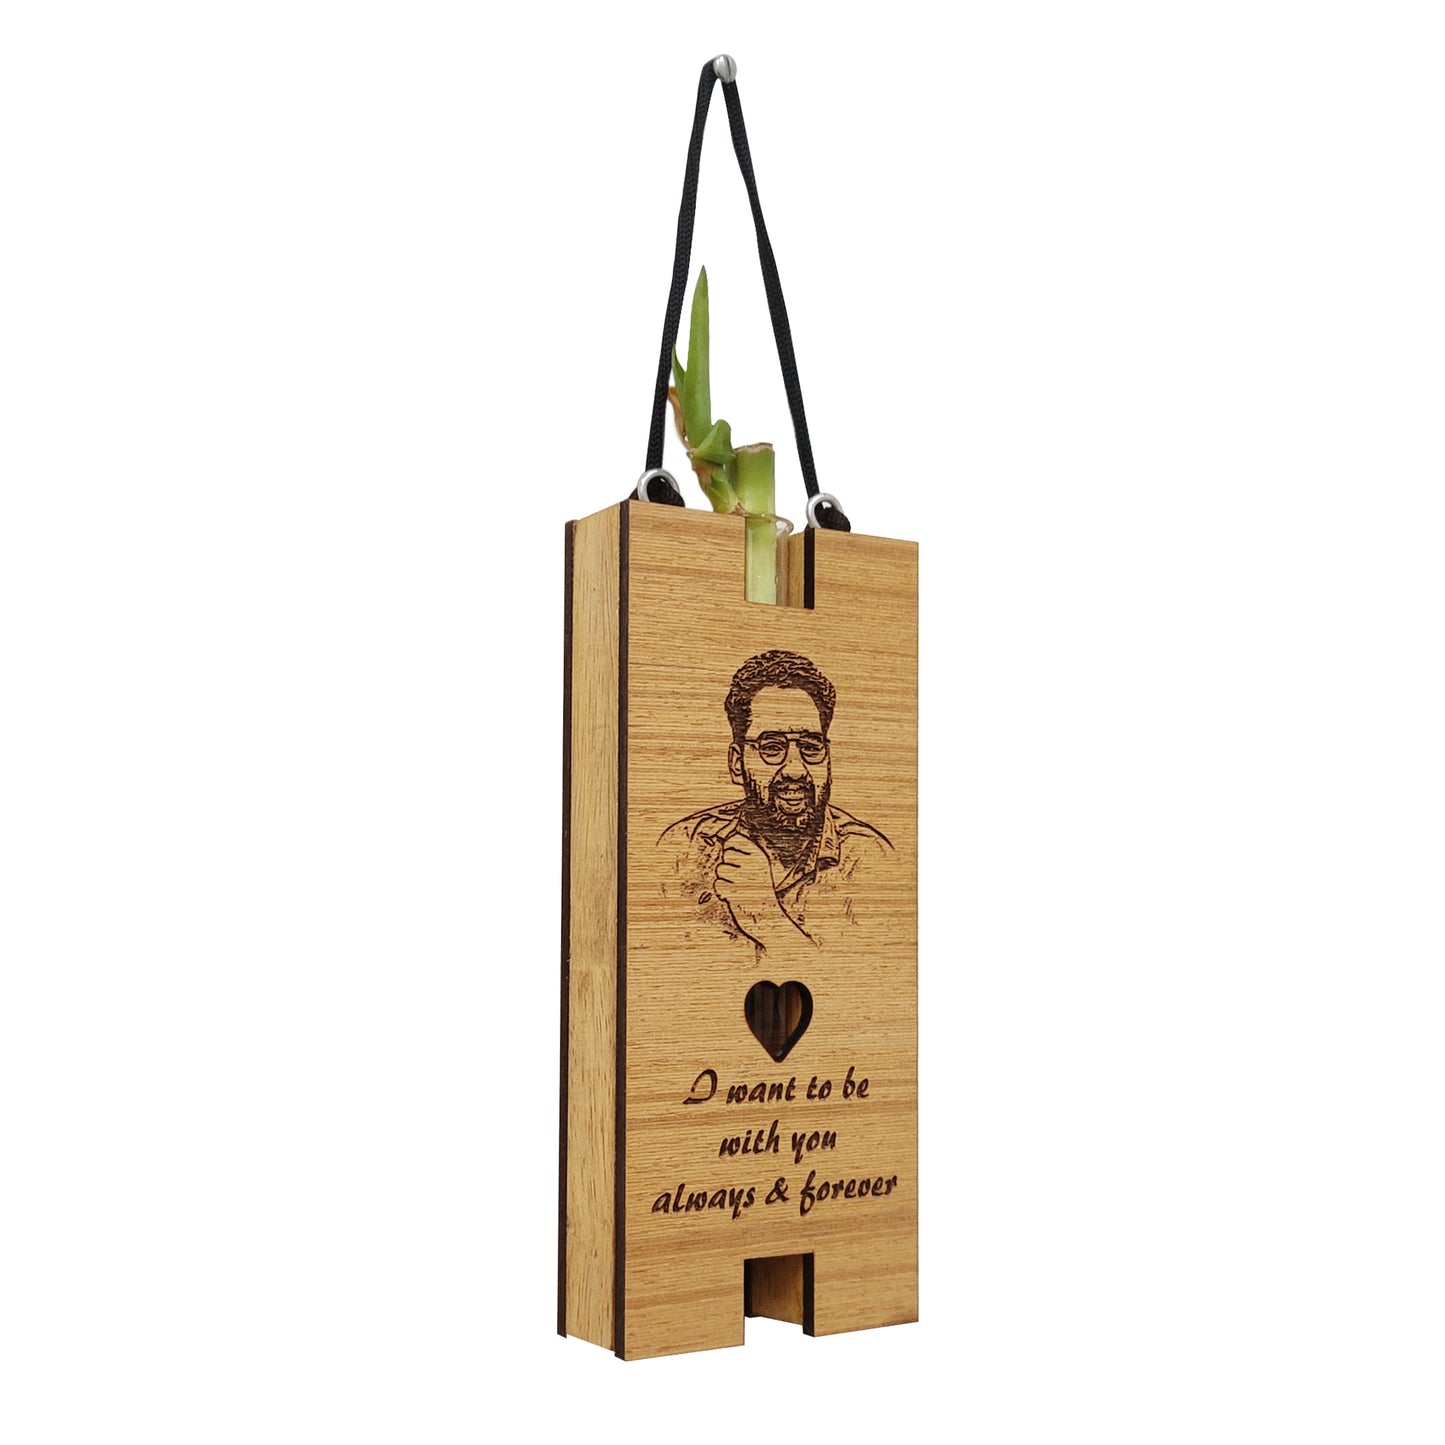 Natural Beauty: Personalized Wooden Hanging Plant Vase - A Thoughtful Gift for any Occasion